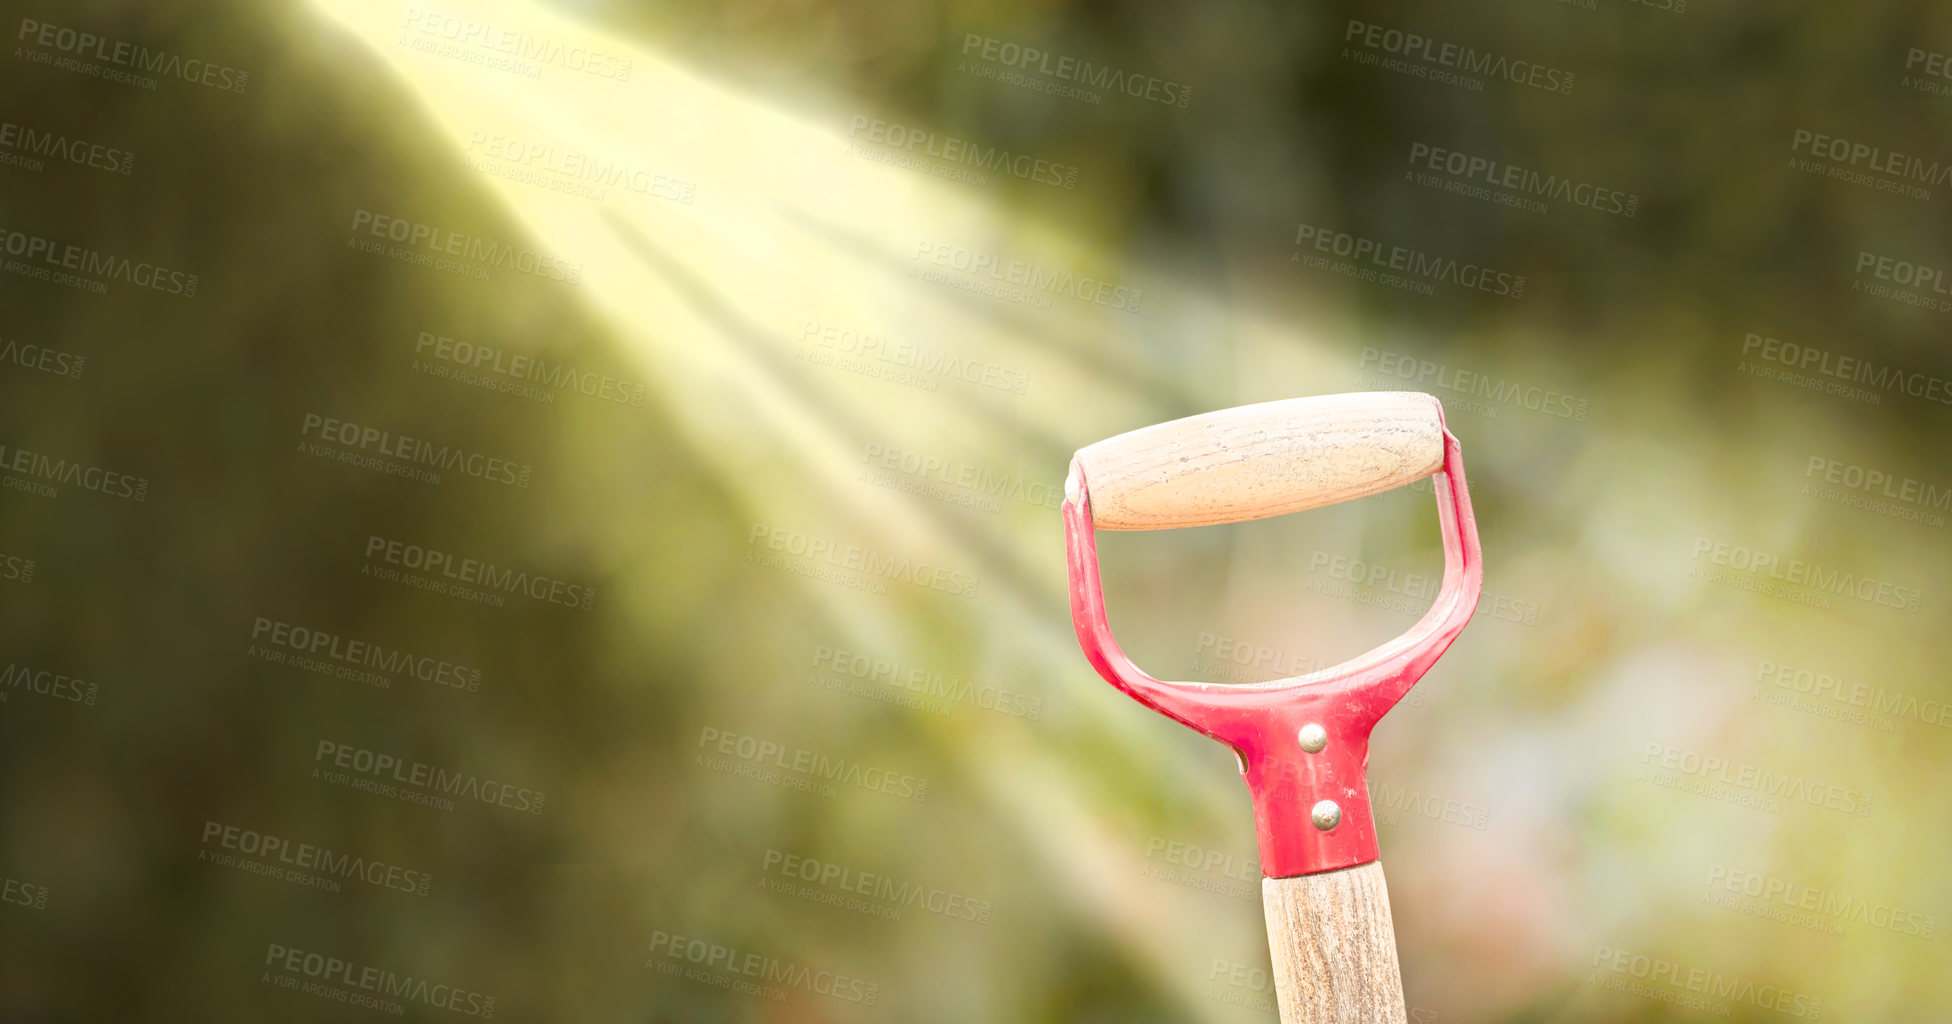 Buy stock photo Sunlight shining on a shovel in a green garden outdoors in the backyard or garden of a house. Closeup of a wooden spade or gardening tool outside in a yard with blurred trees in the background